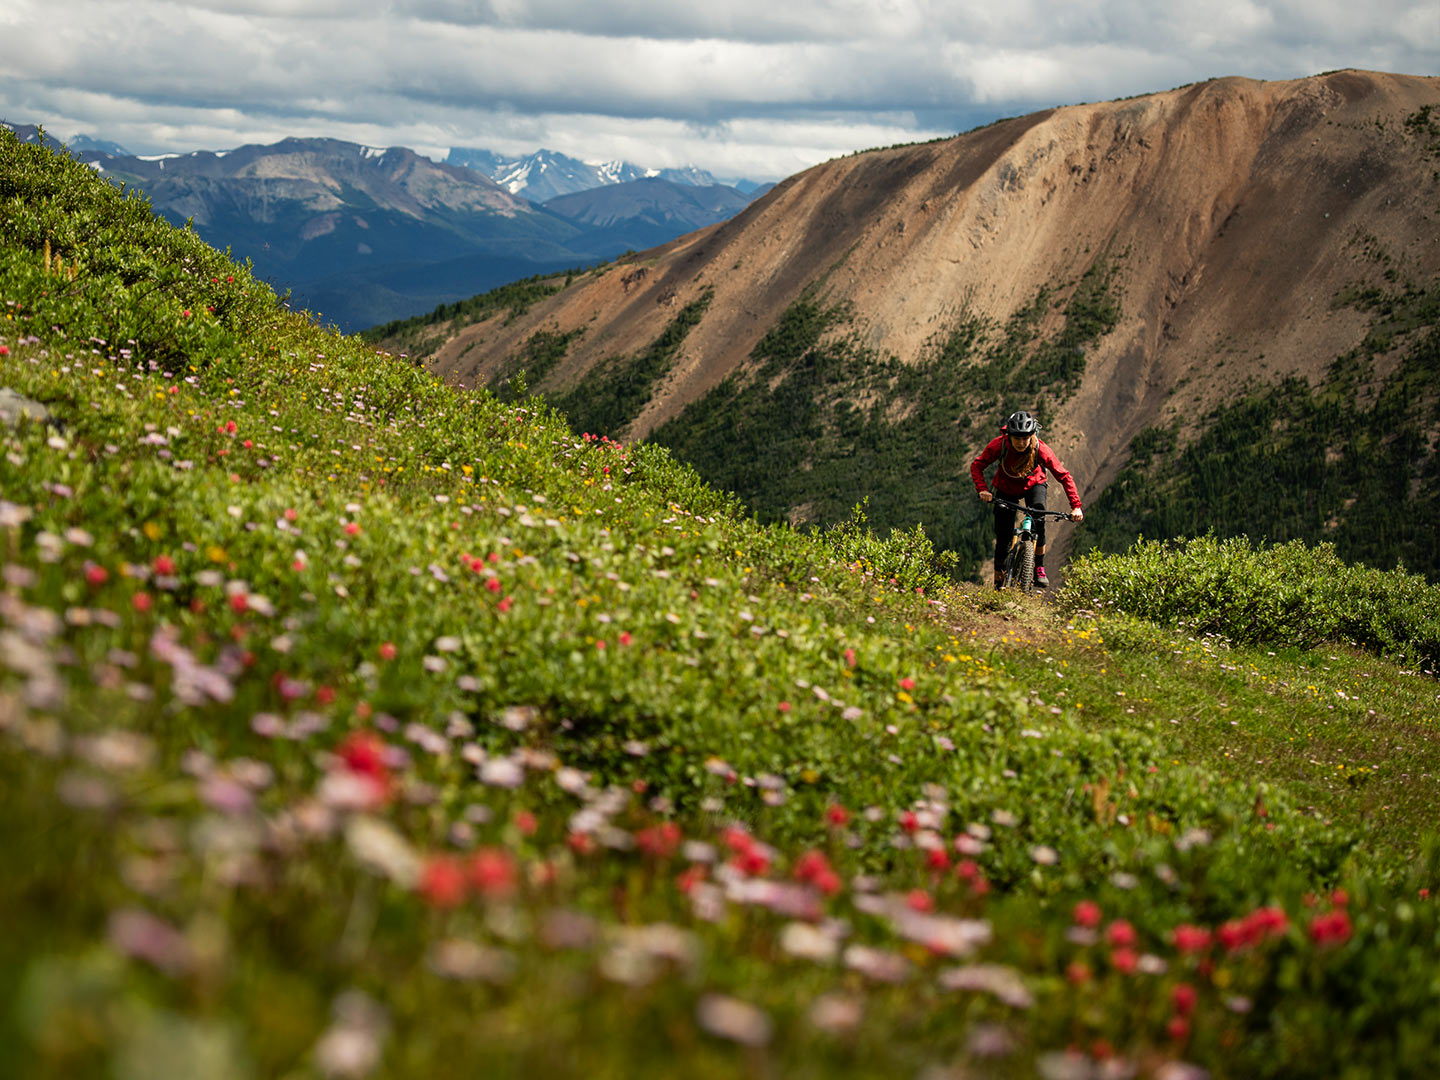 Distant rider climbs up trail covered in wild flowers